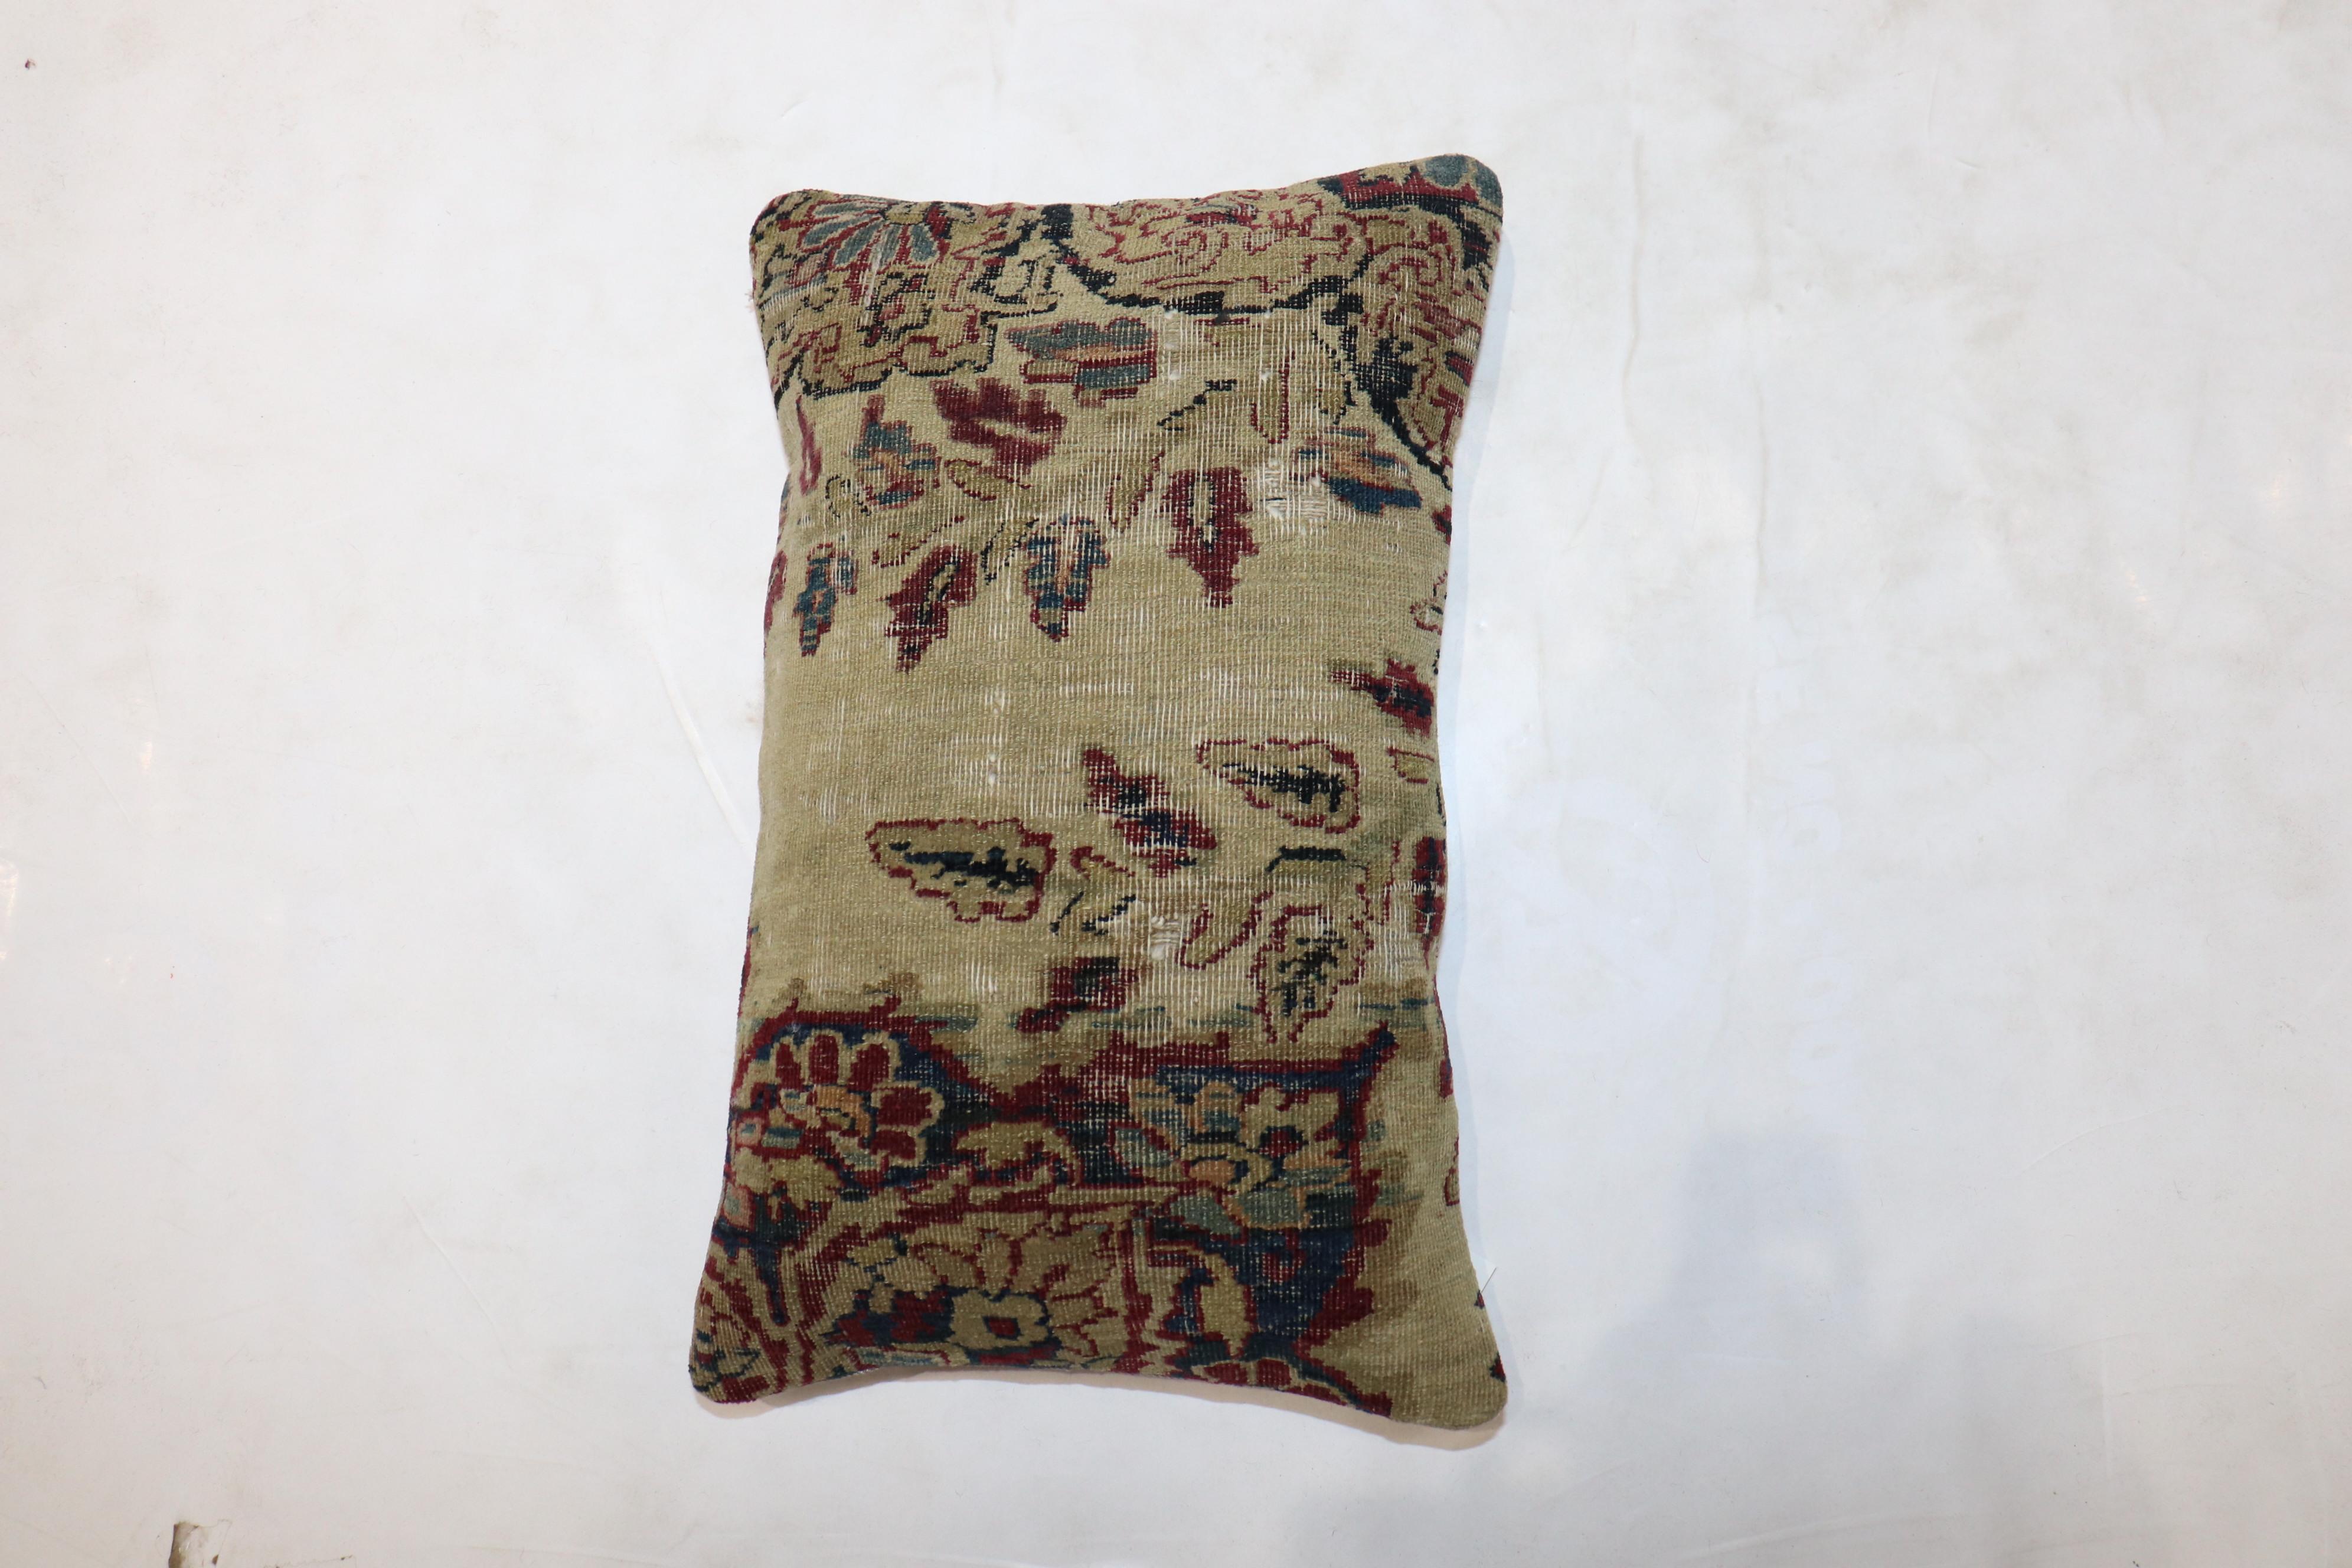 Pillow made from a 19th century Persian Kerman rug. Fill insert and zipper closure provided

Measures: 12